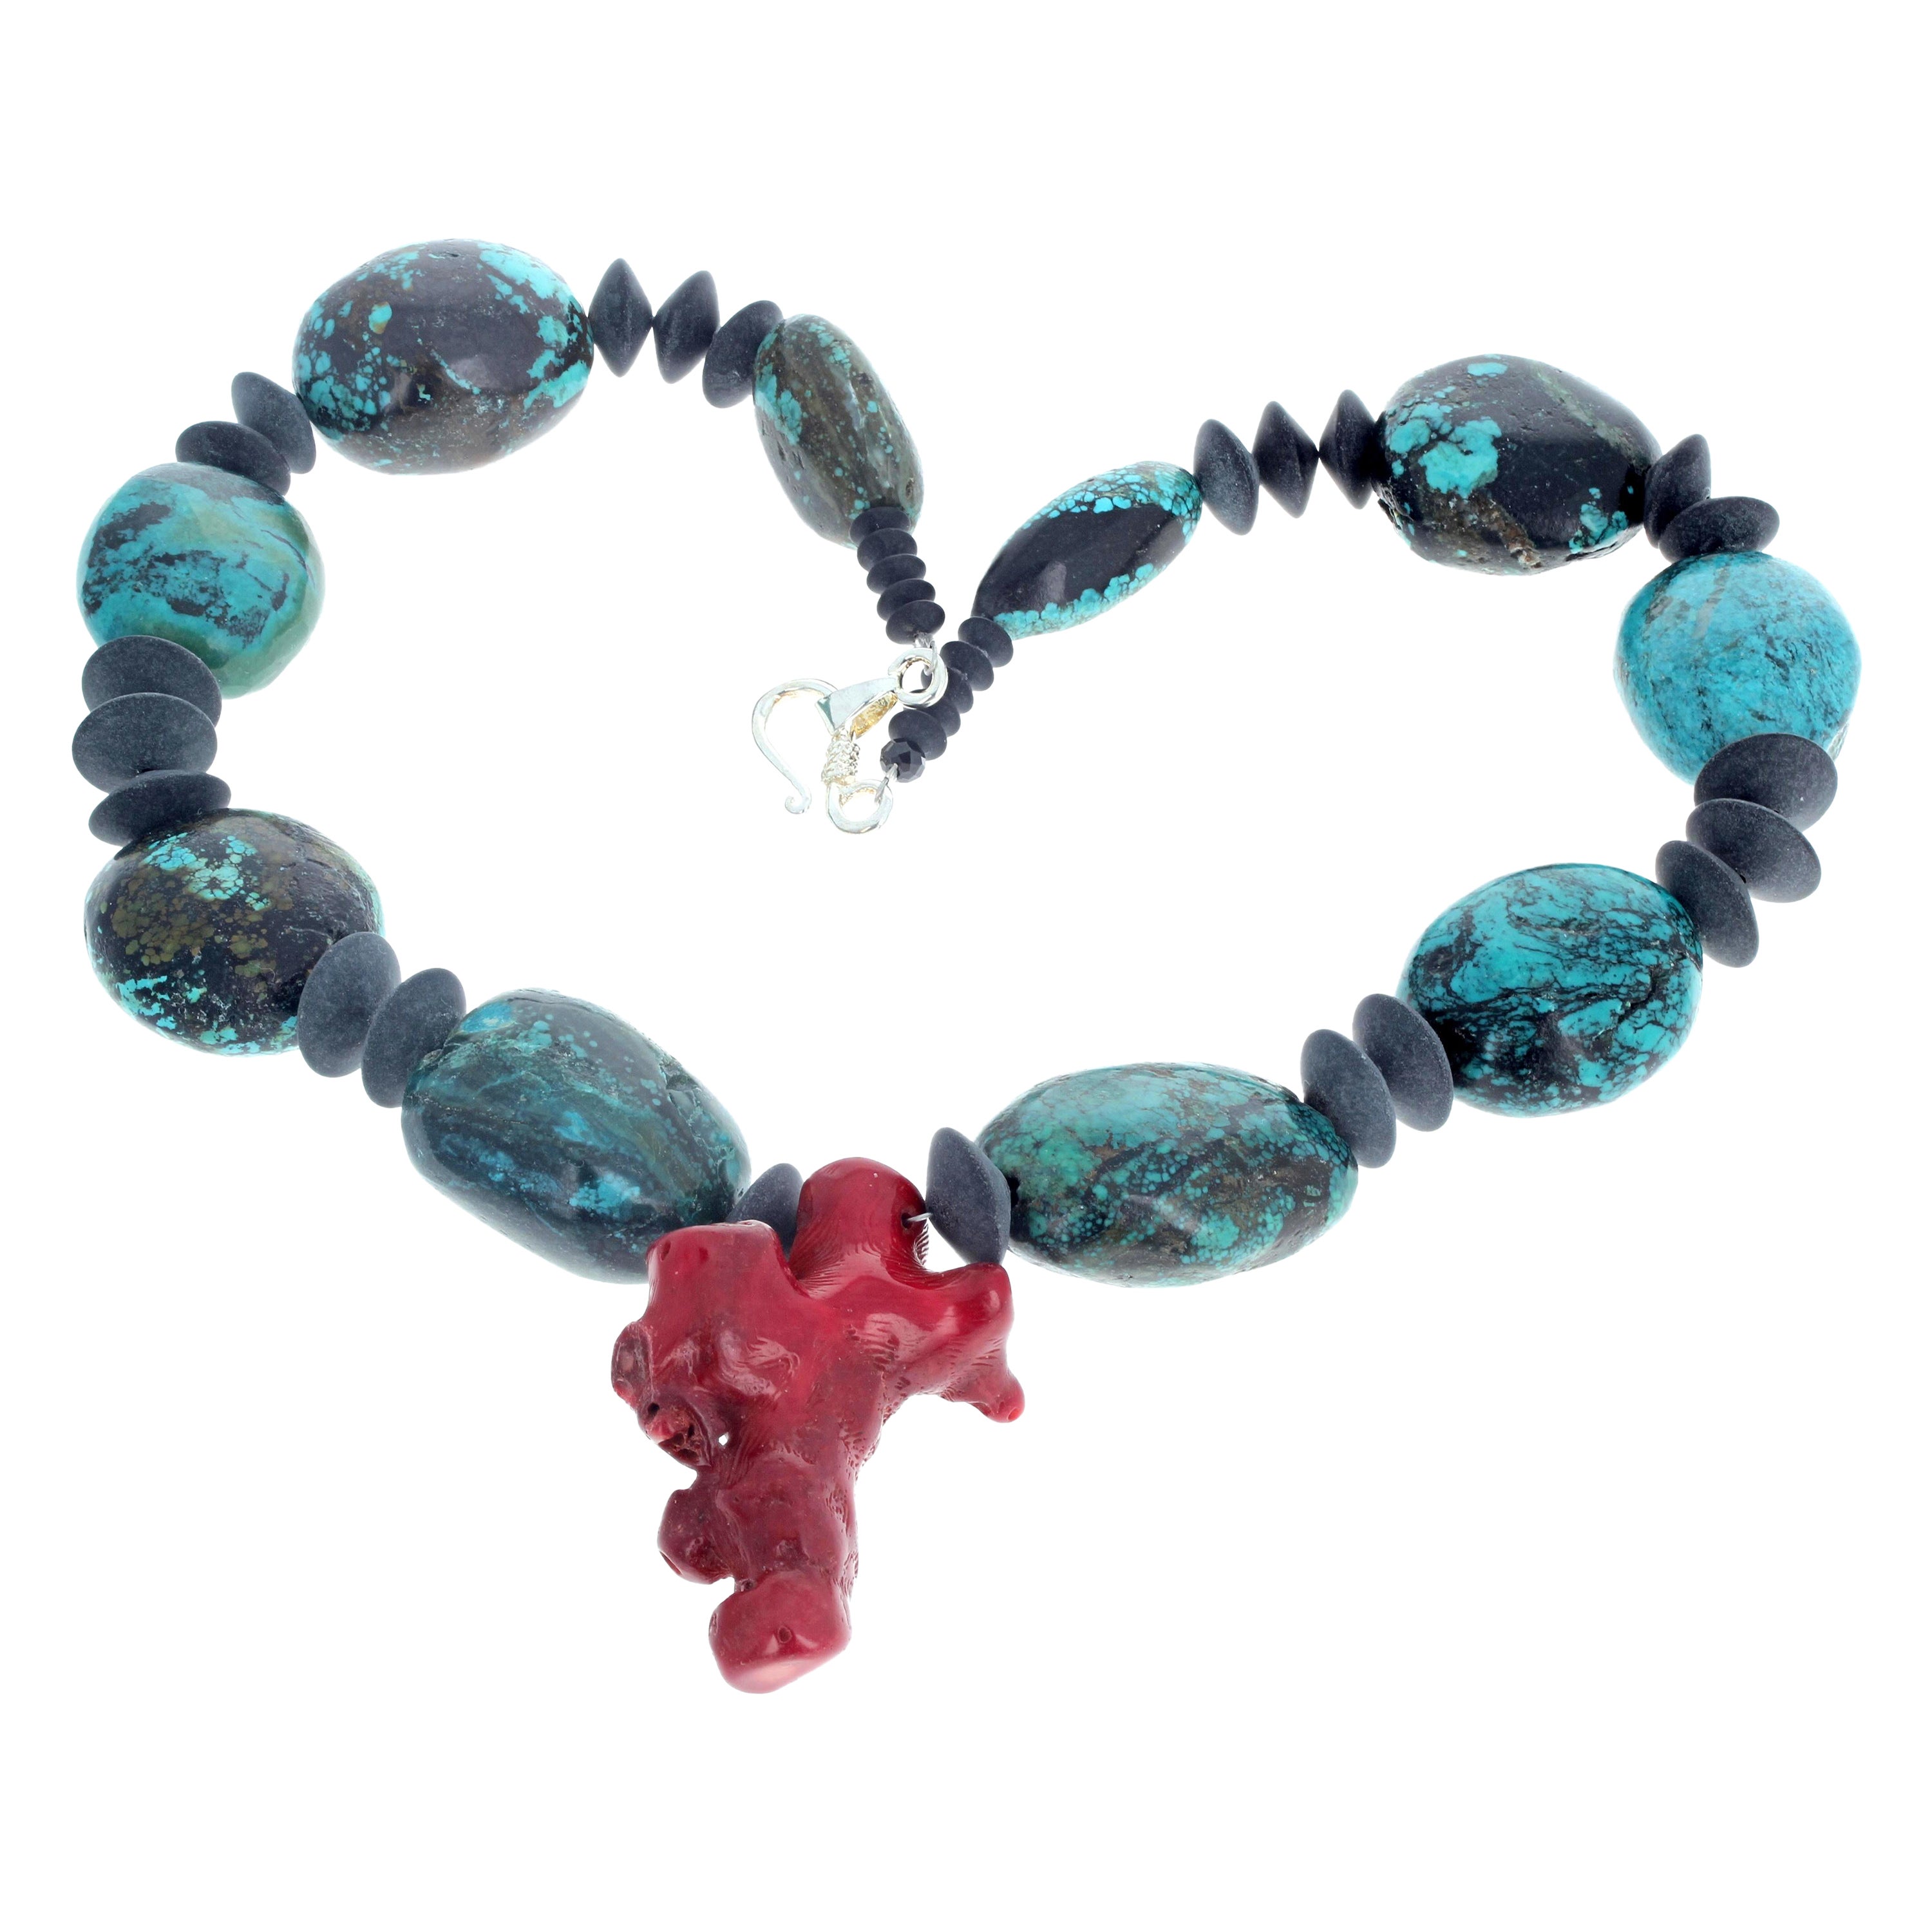 AJD Elegant Statement Turquoise, Onyx & Coral 20 1/2" Necklace For Sale